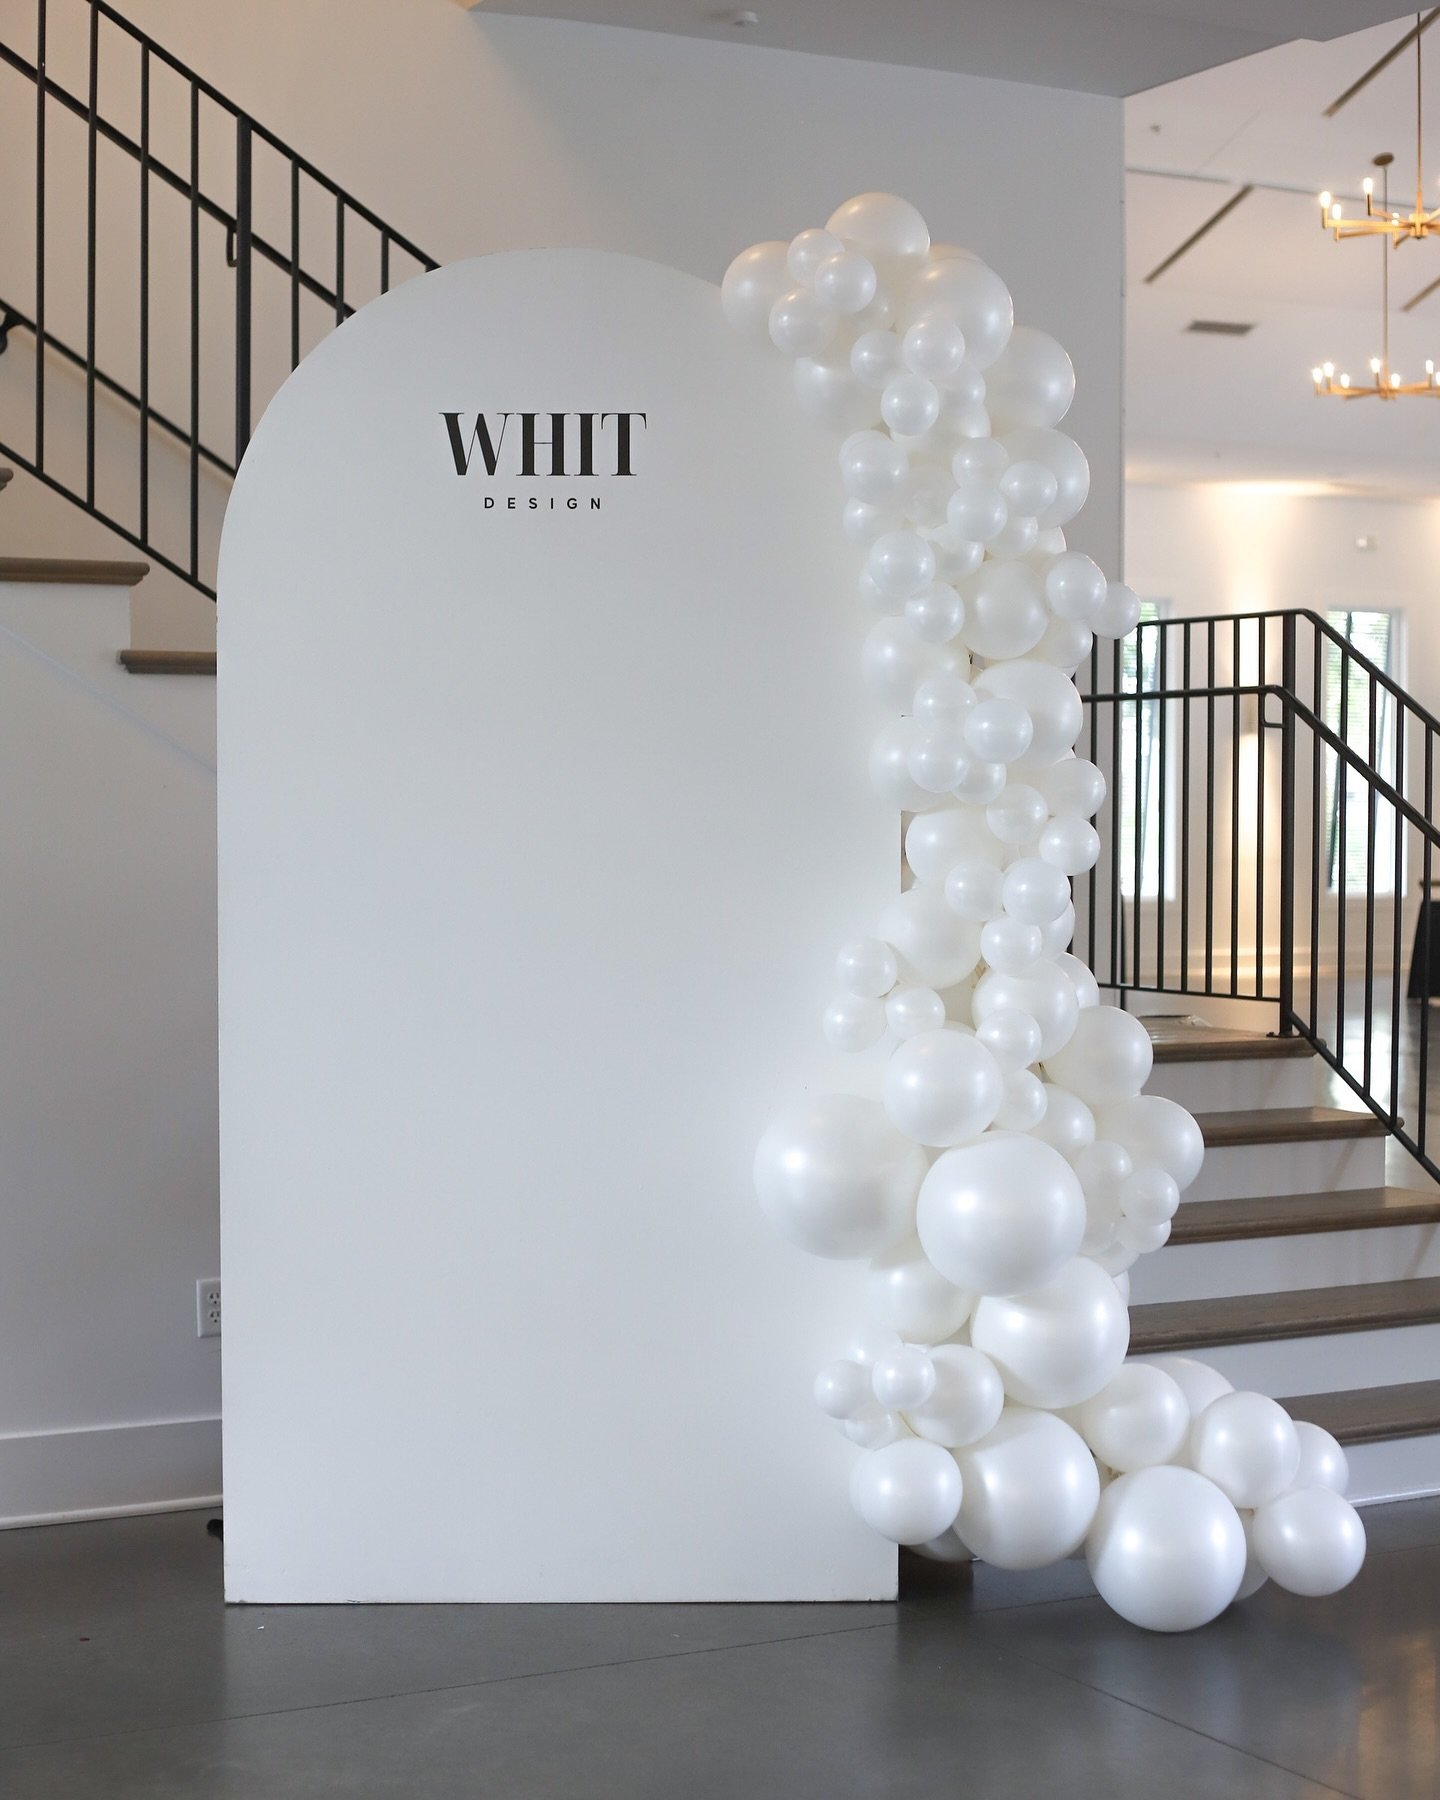 We loved this backdrop &amp; balloon combo for @whitdesign_ event at @thehuttonhouse 🎈🎊